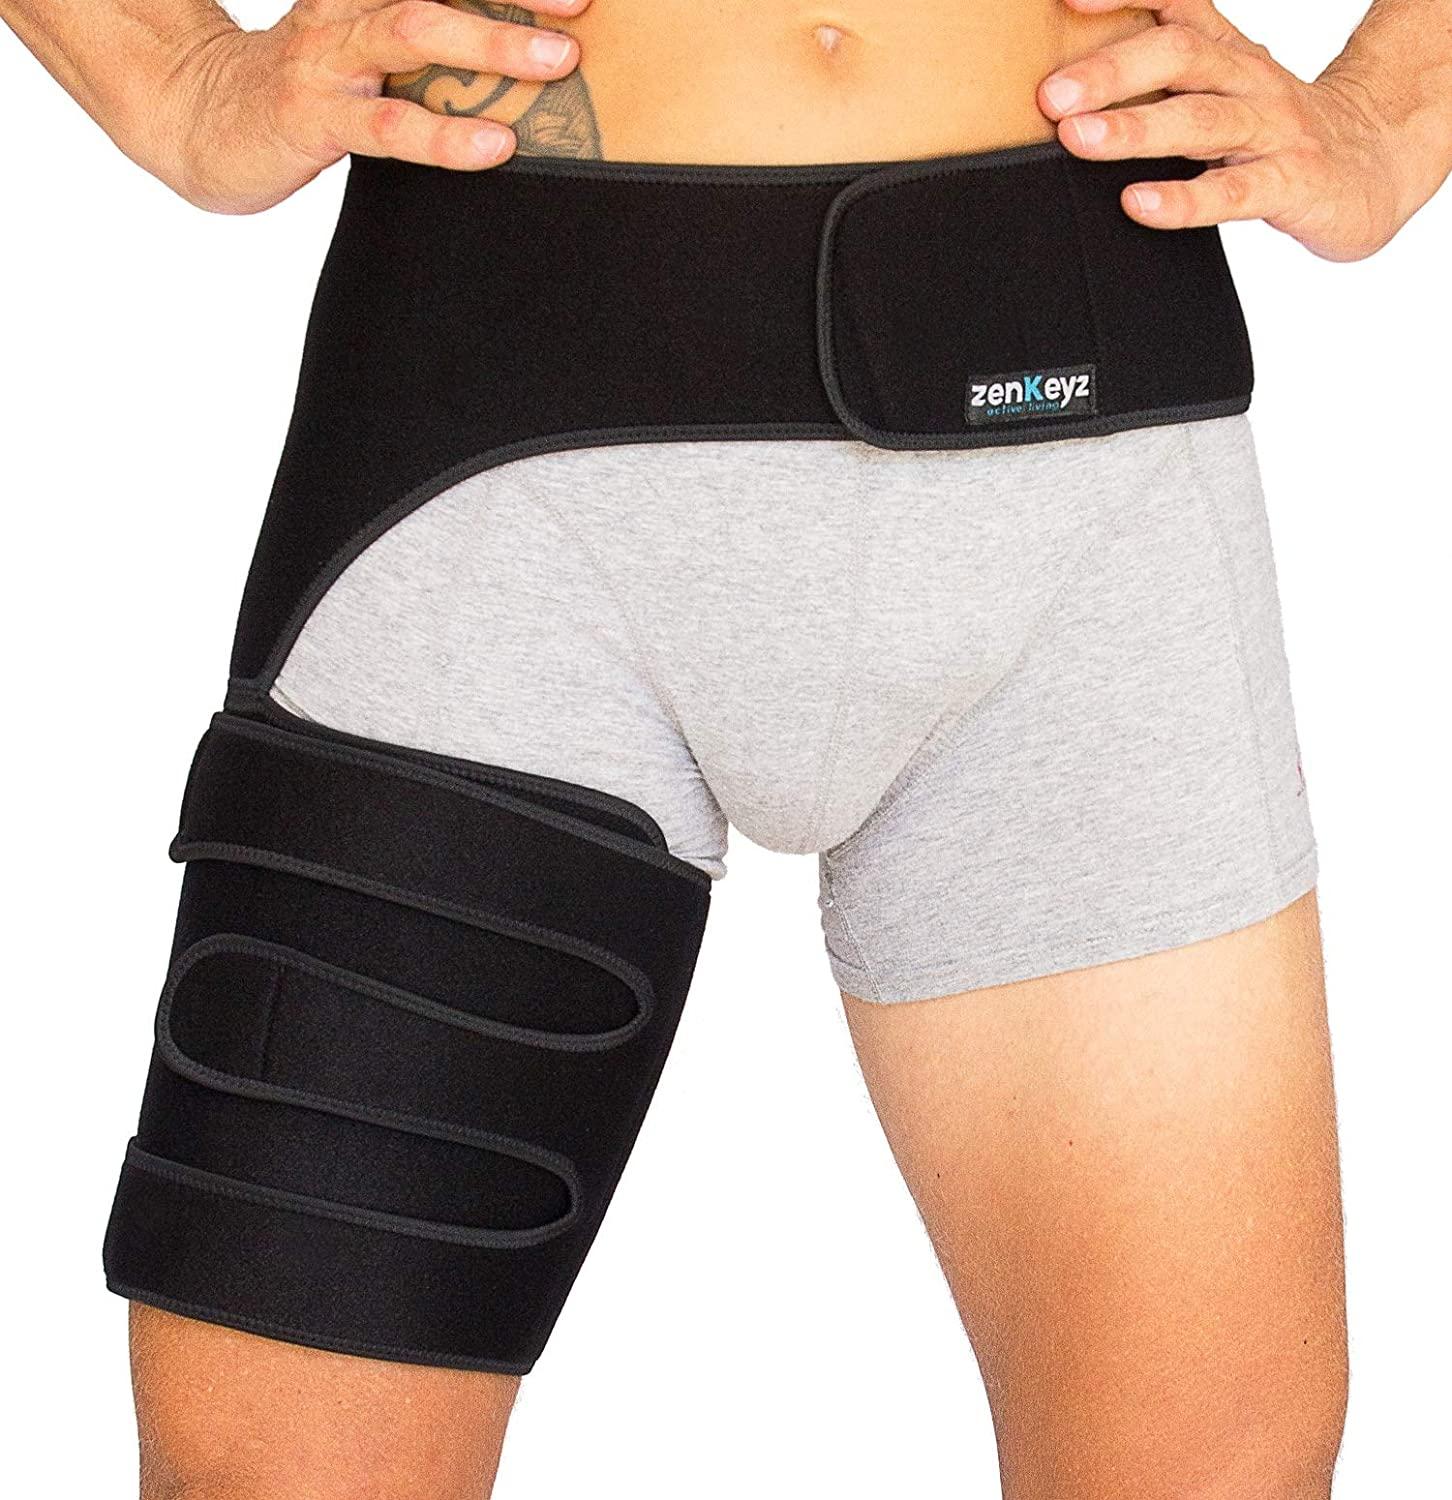 REAQER Hip Thigh Support Brace Groin Compression Wrap for Pulled Groin  Sciatic Nerve Pain Hamstring Injury